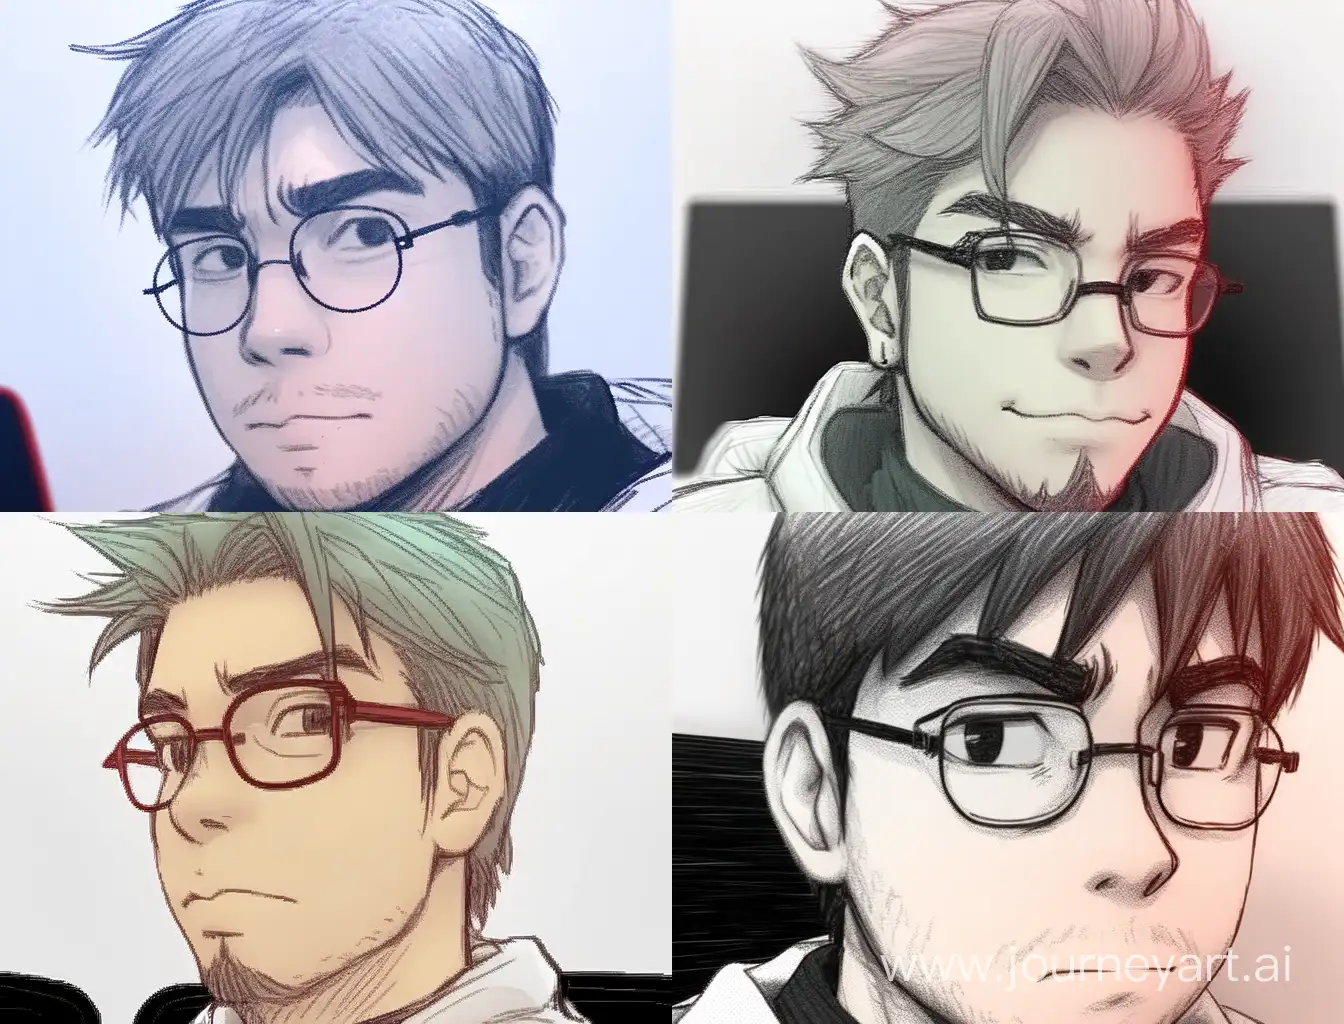 Anime-Portrait-of-a-Man-with-Glasses